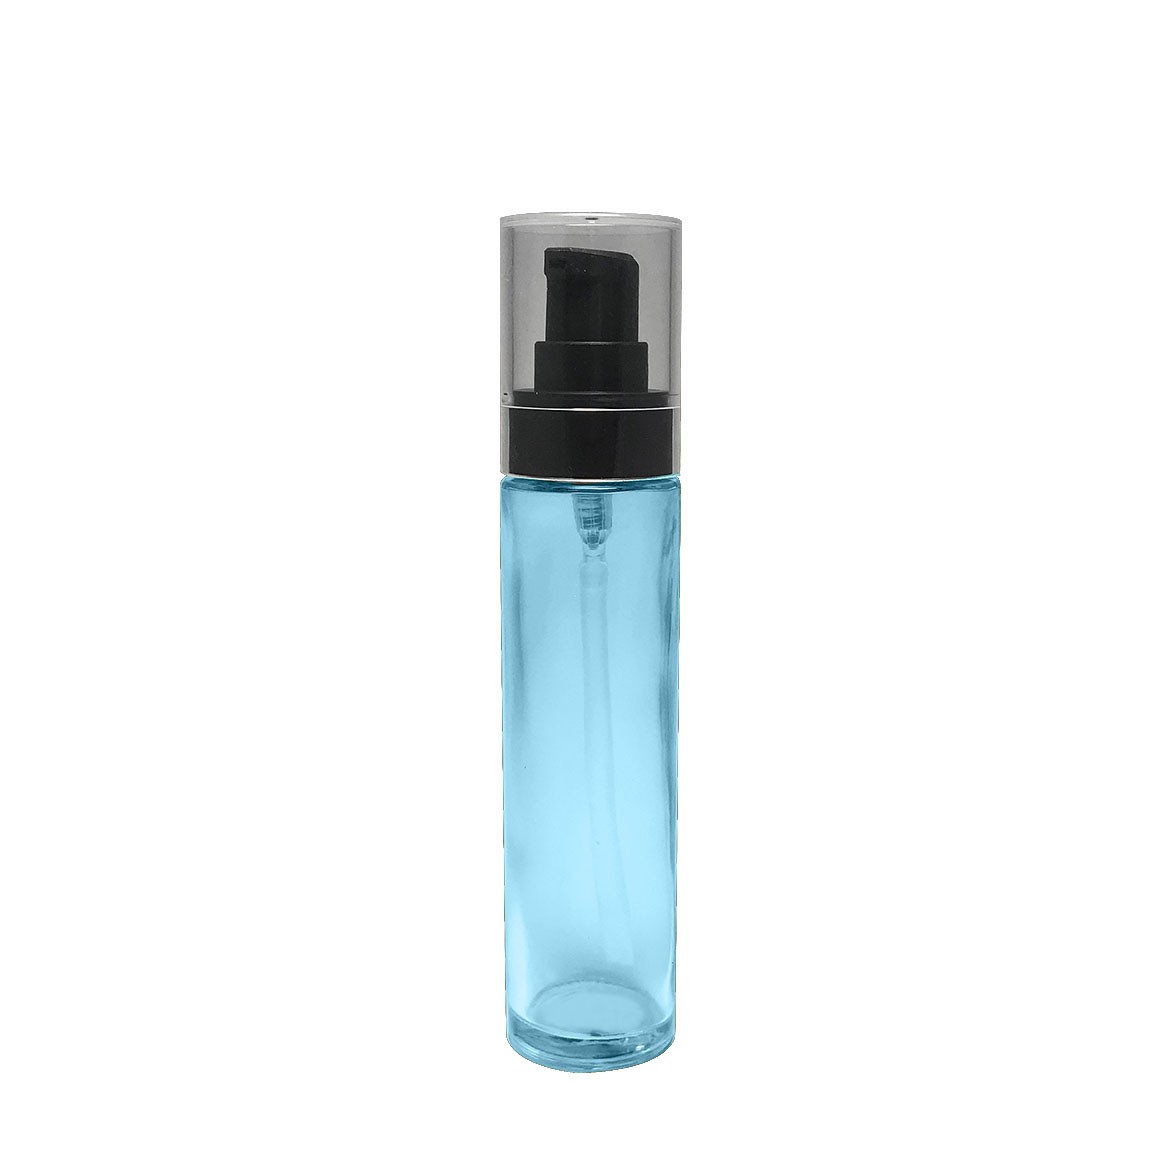 Best seller made in Taiwan semi transparent cylinder shape 45ml glass bottle 20/400 neck size black lotion treatment pump